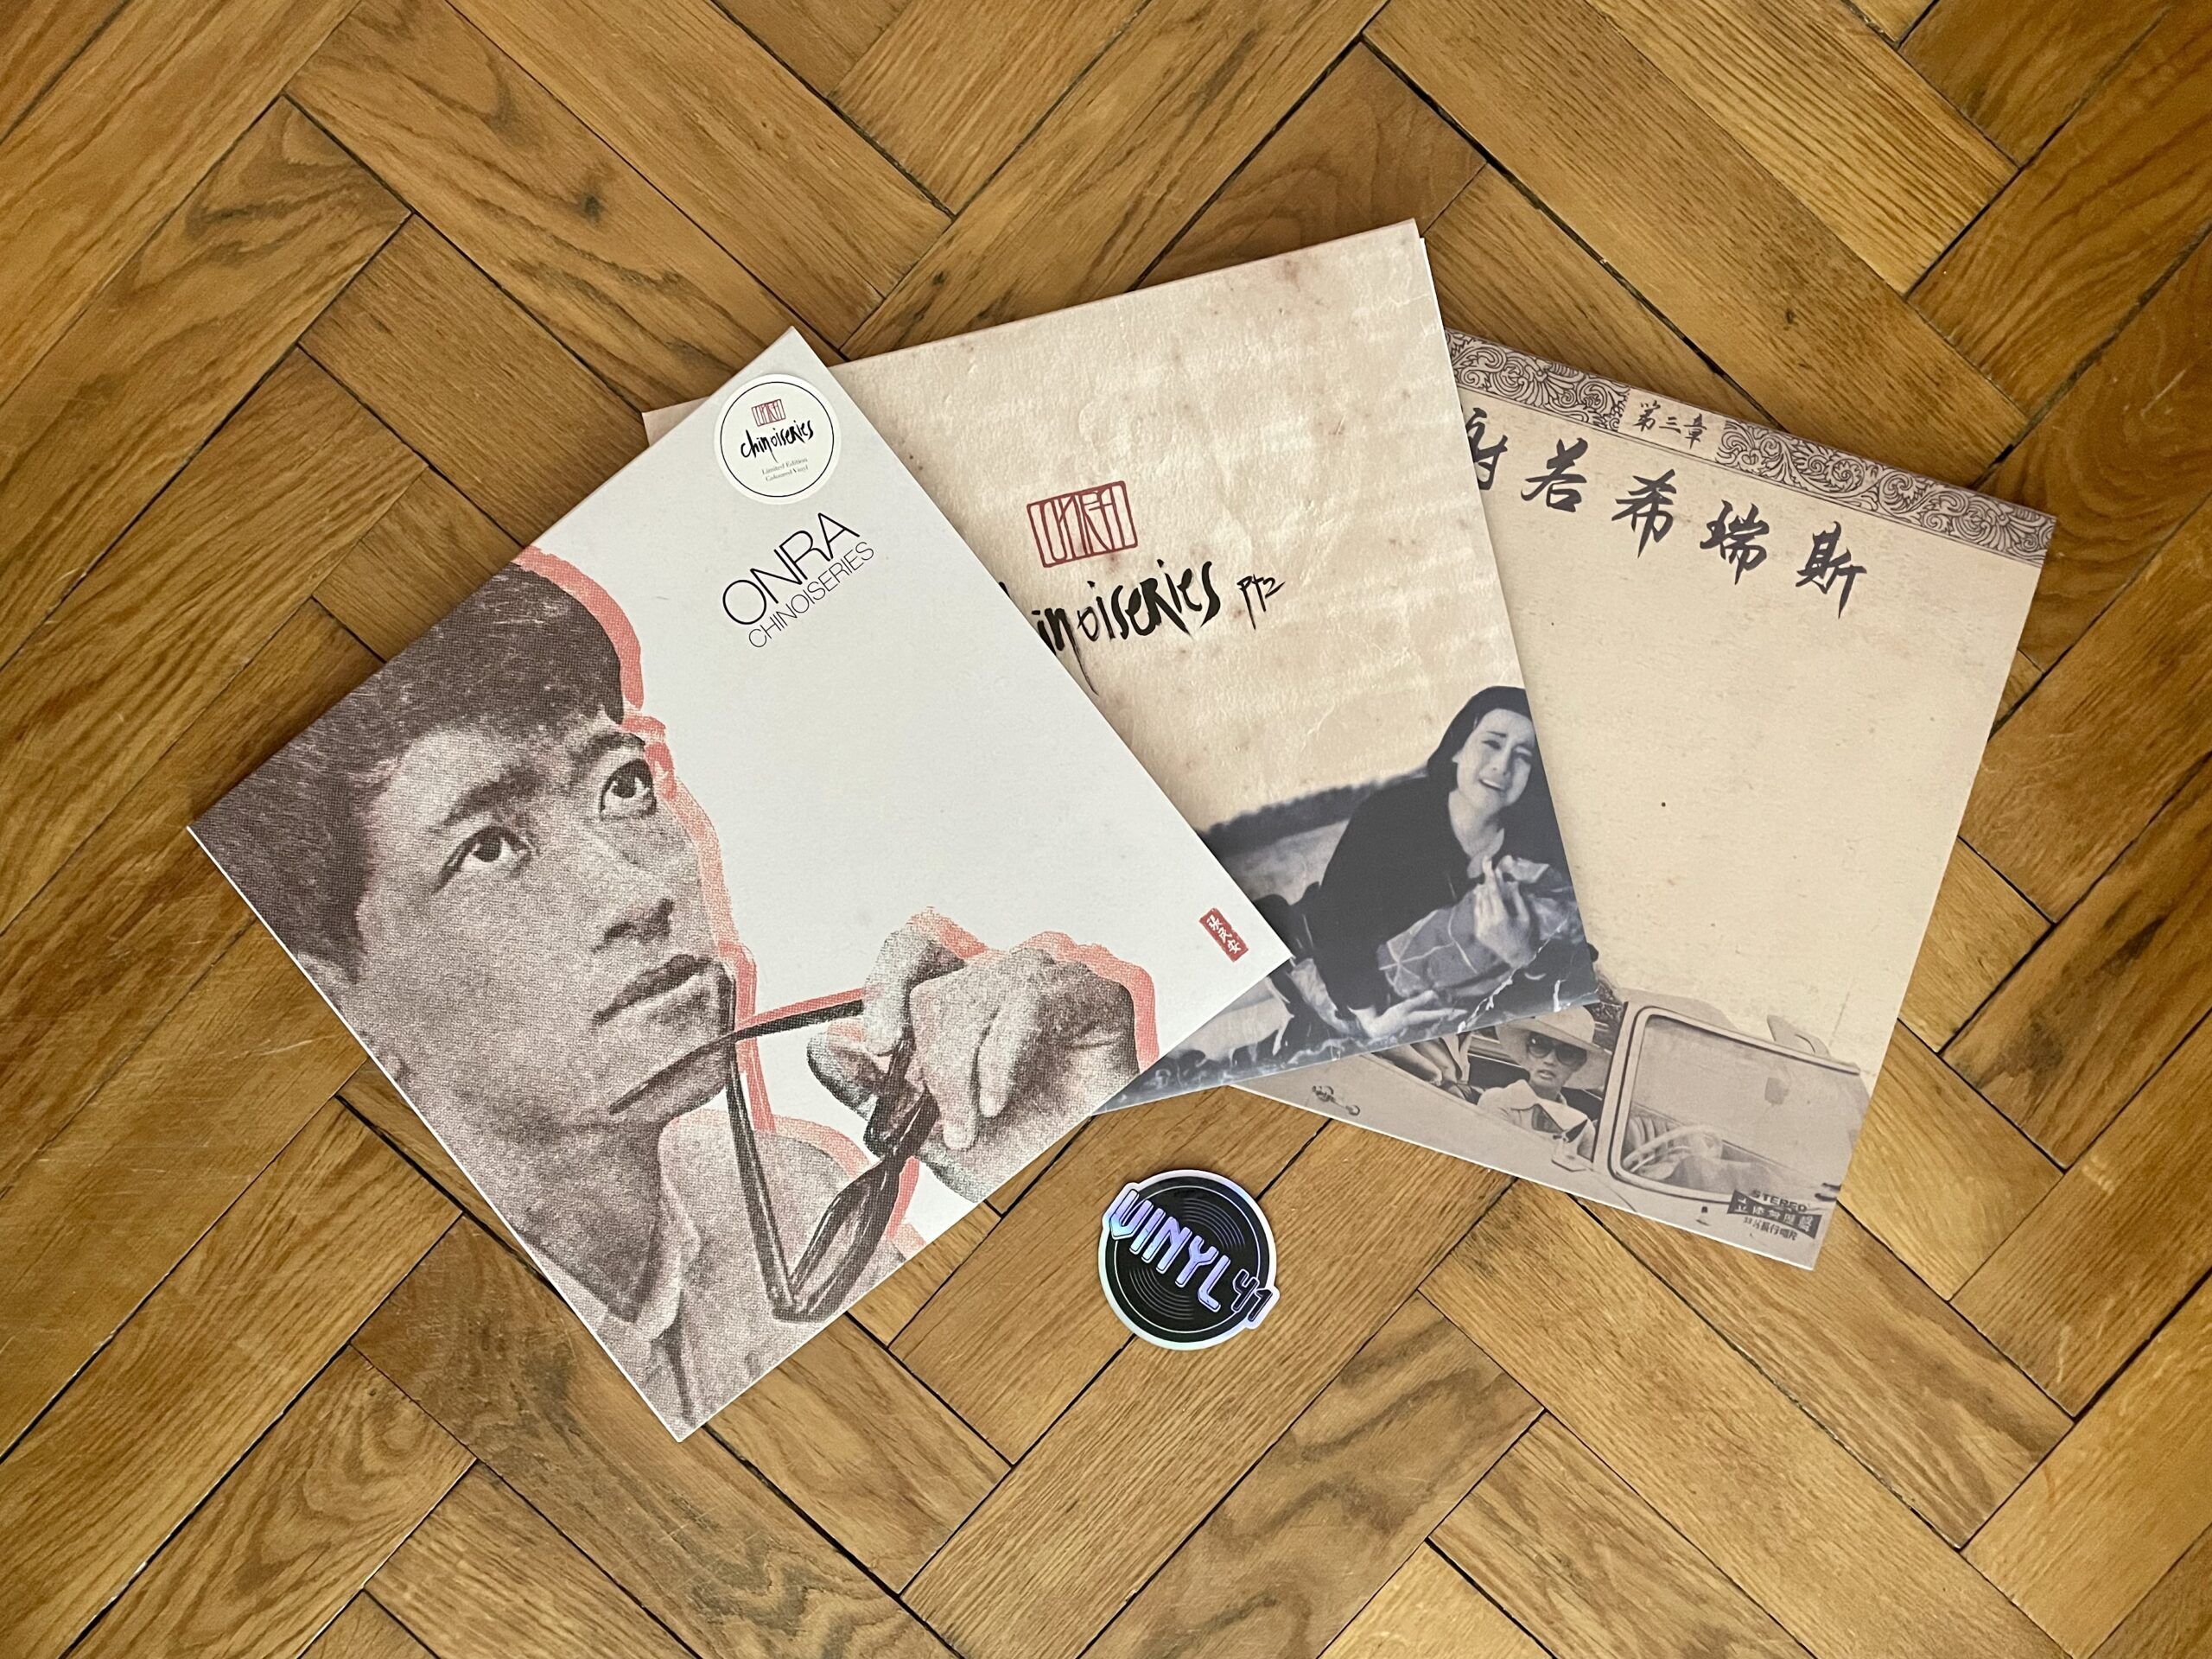 Onra - Chinoiseries pt. 1 & 2 & 3 (All City Records)